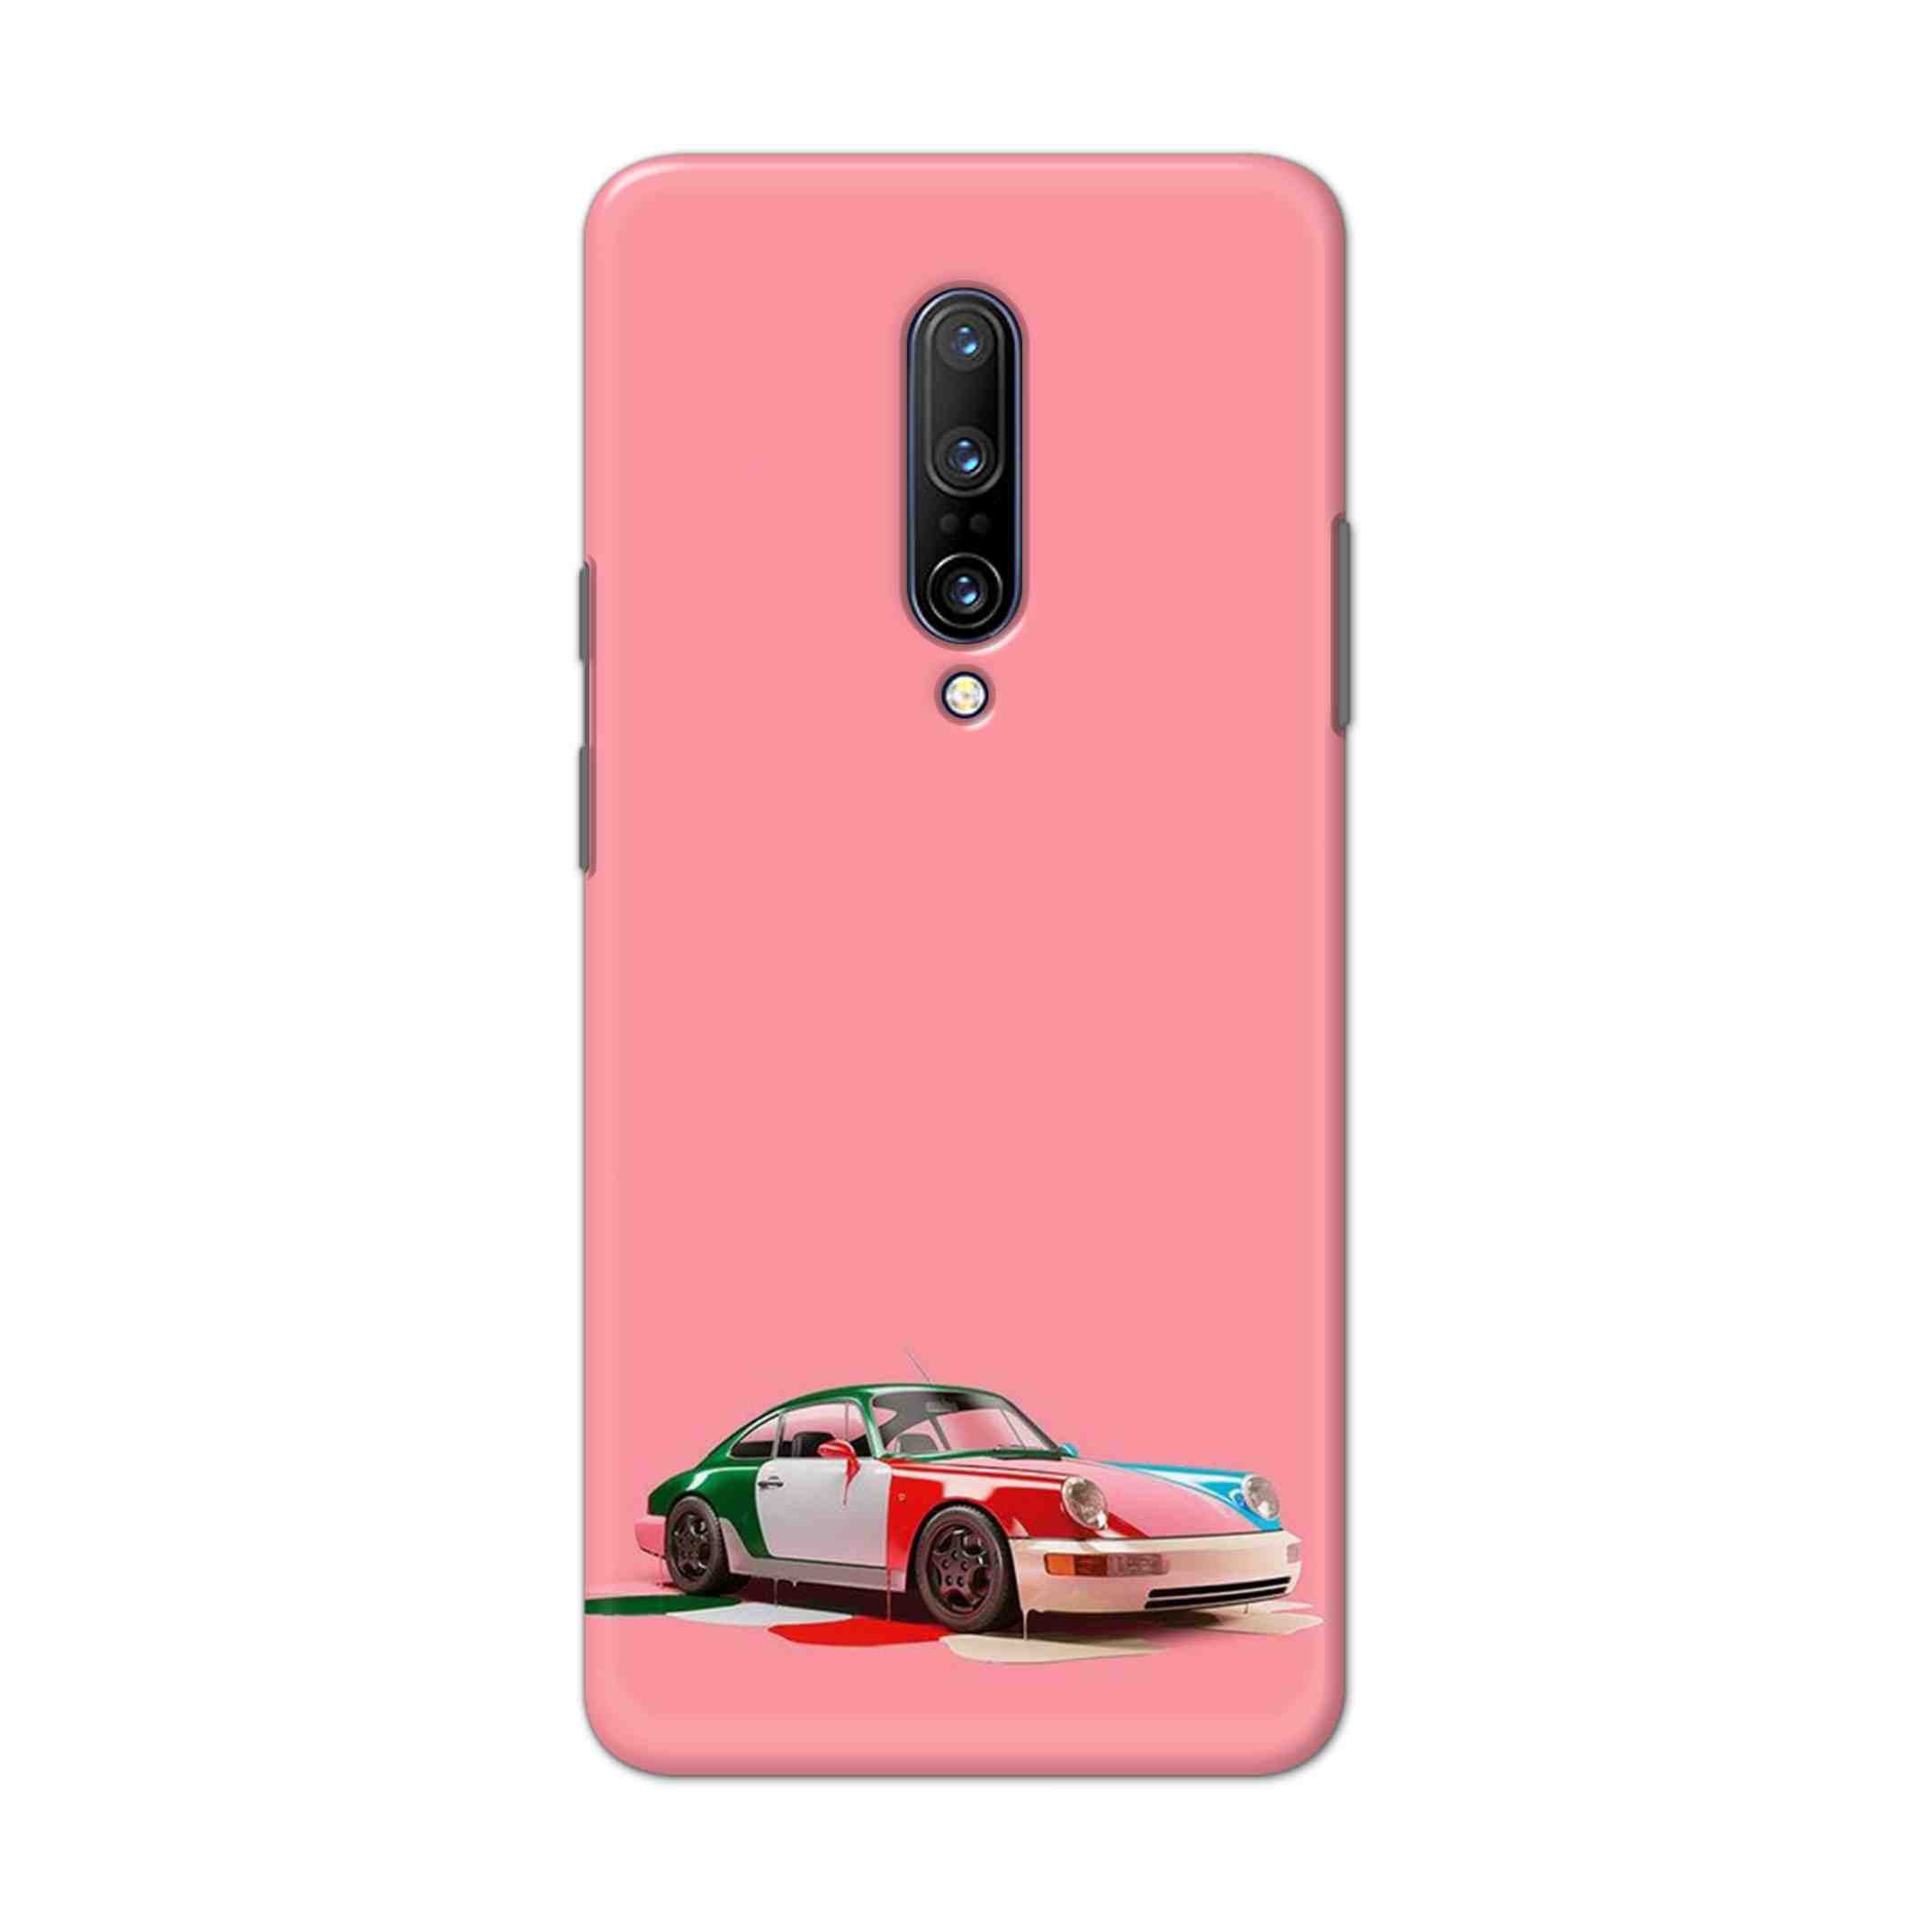 Buy Pink Porche Hard Back Mobile Phone Case Cover For OnePlus 7 Pro Online